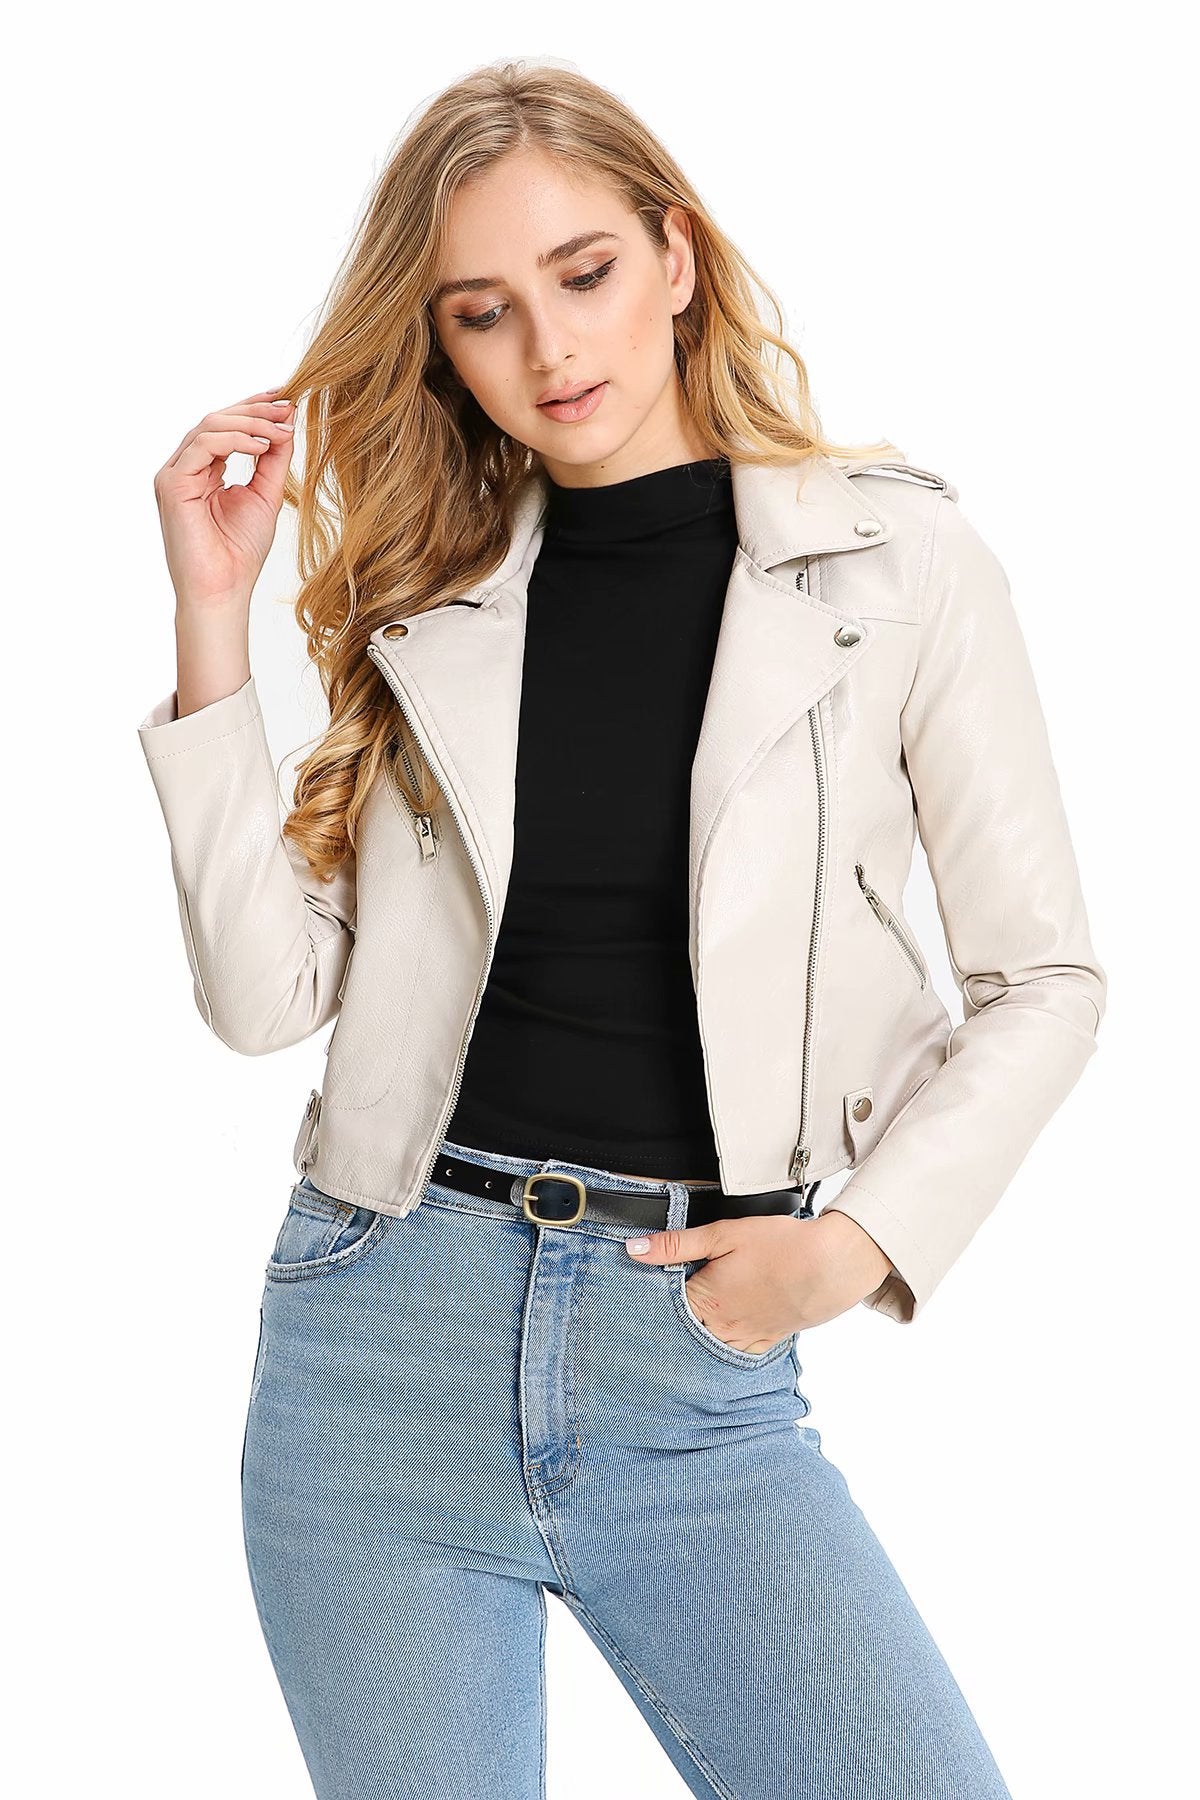 Leather Women's Short Fashion PU Small Slim Slim-fit Motorcycle Leather Jacket